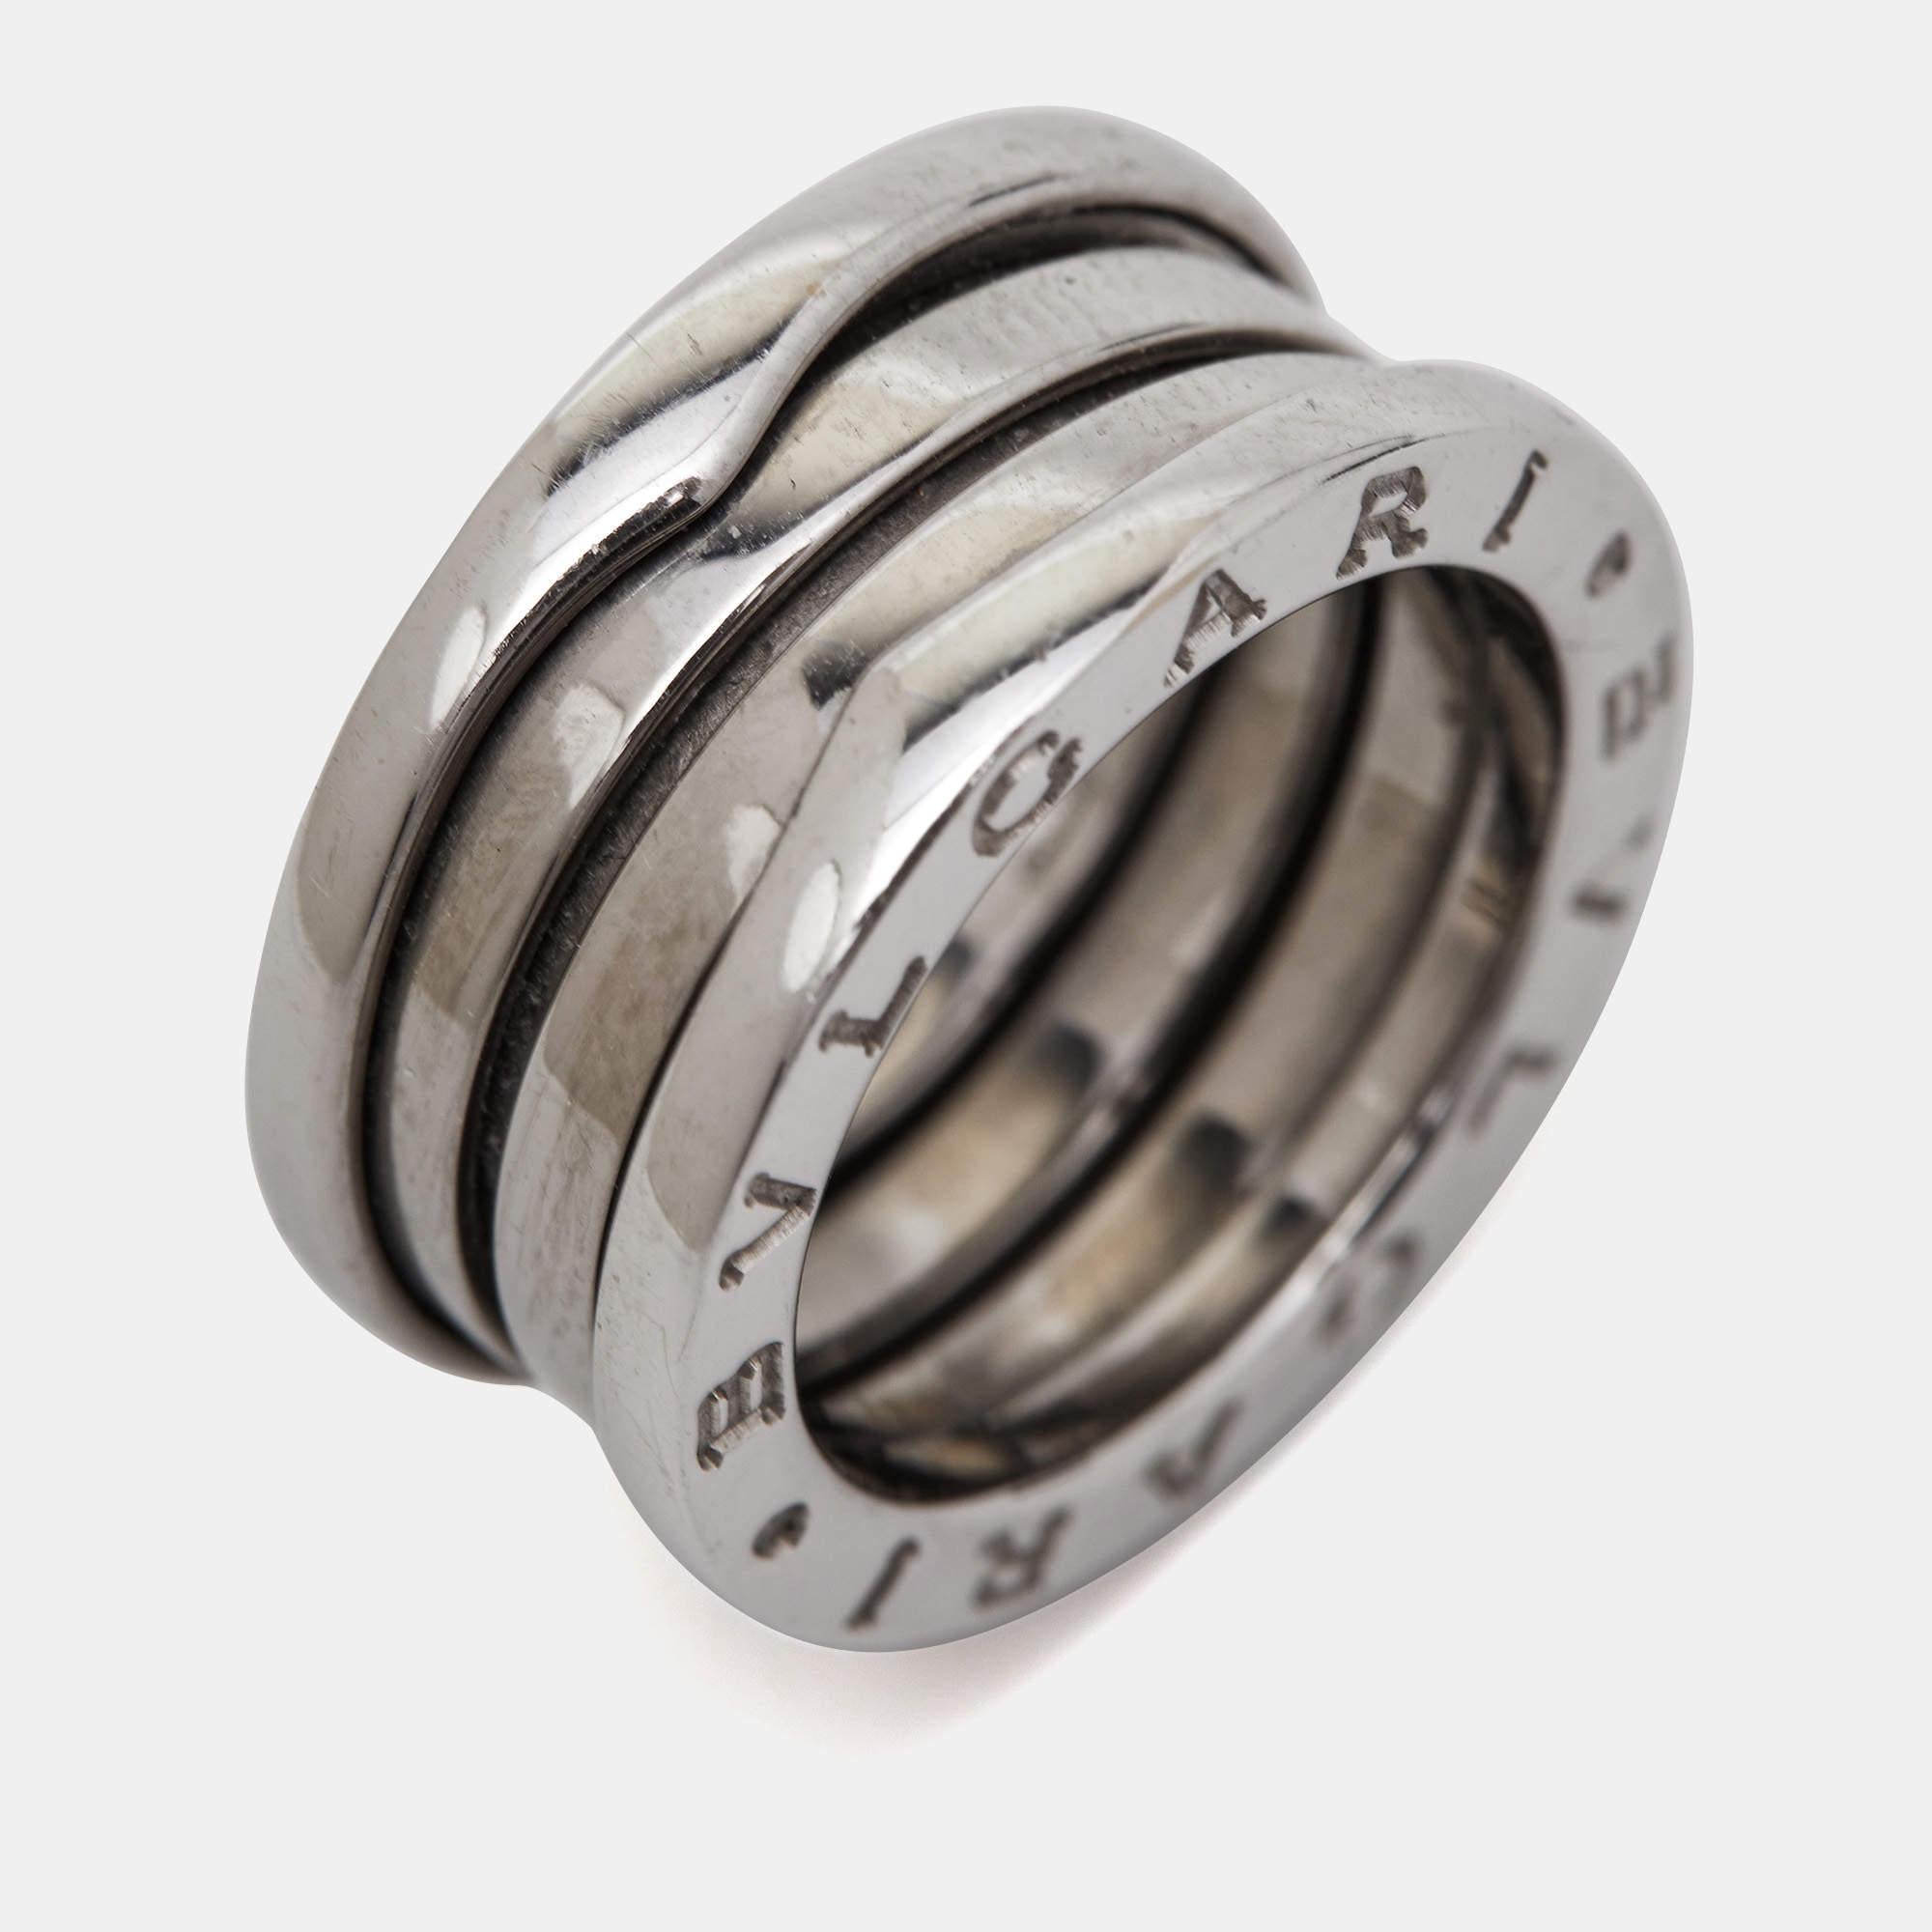 The Bvlgari B.Zero1 ring is a luxurious and iconic piece of jewelry. Crafted from exquisite 18k white gold, it features four interlocking bands, creating a contemporary and bold design. This timeless ring seamlessly combines elegance and modernity,